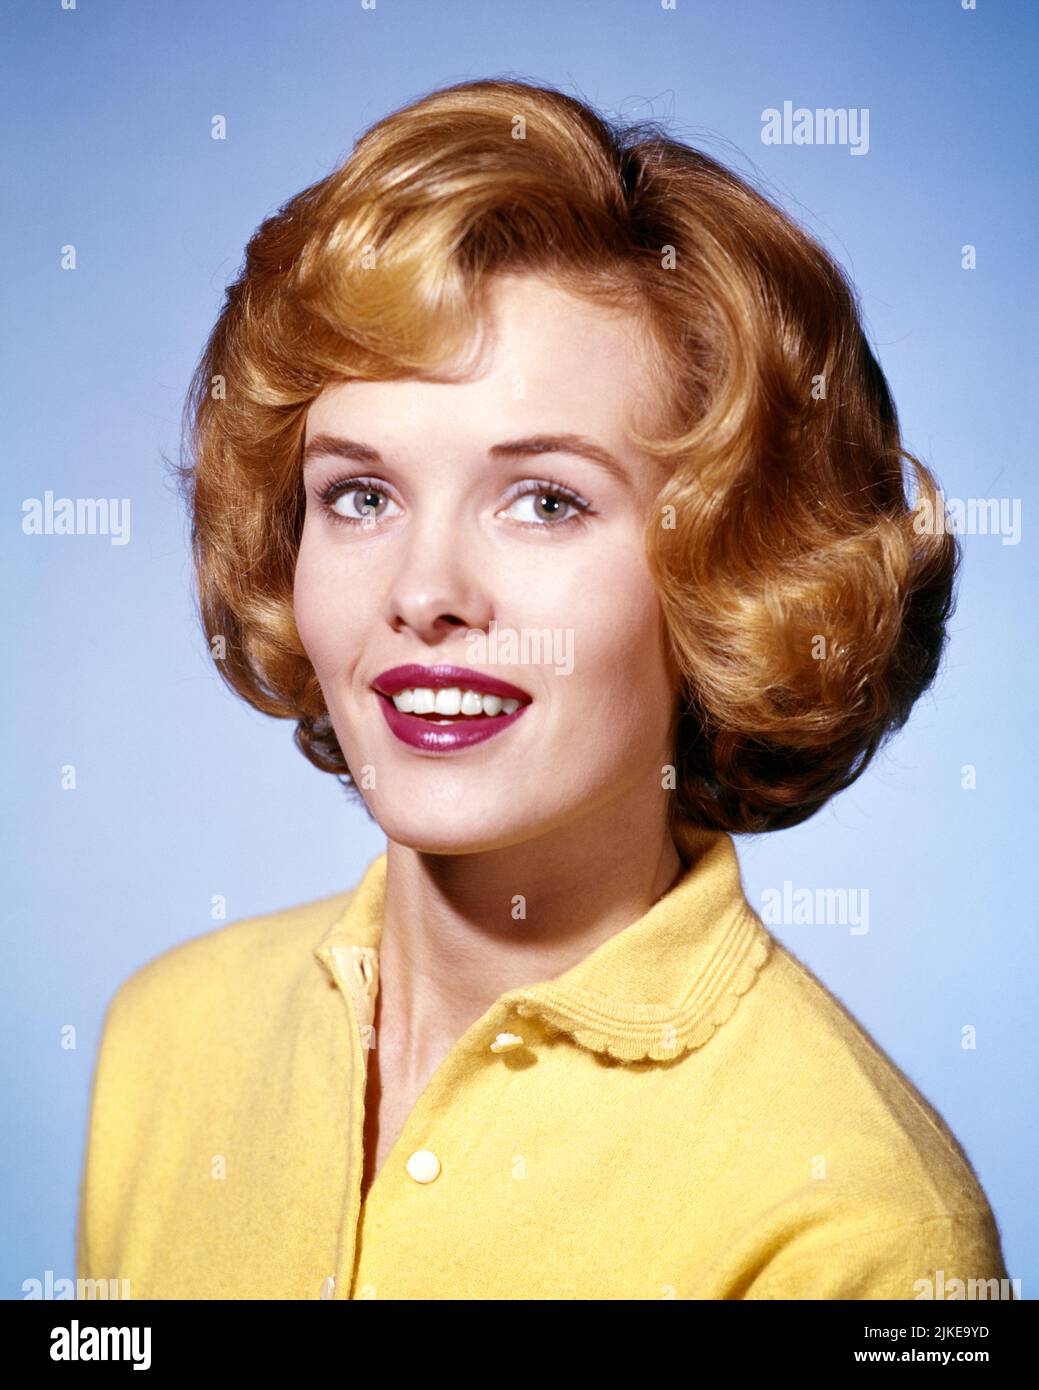 1960s SMILING BLOND WOMAN GOLDEN HAIR RED LIPSTICK IN YELLOW SWEATER LOOKING AT CAMERA DIRECTLY AHEAD - kg1468 DEB001 HARS FEMALES STUDIO SHOT GROWNUP HEALTHINESS COPY SPACE LADIES GOLDEN PERSONS GROWN-UP CONFIDENCE EXPRESSIONS EYE CONTACT HAPPINESS HEAD AND SHOULDERS CHEERFUL STYLES HAIRSTYLE LIPSTICK SMILES DIRECTLY WAVY JOYFUL STYLISH DEB001 AHEAD PLEASANT CONFIDENT FASHIONS STRAWBERRY BLOND TEASED YOUNG ADULT WOMAN BOUFFANT CAUCASIAN ETHNICITY OLD FASHIONED Stock Photo